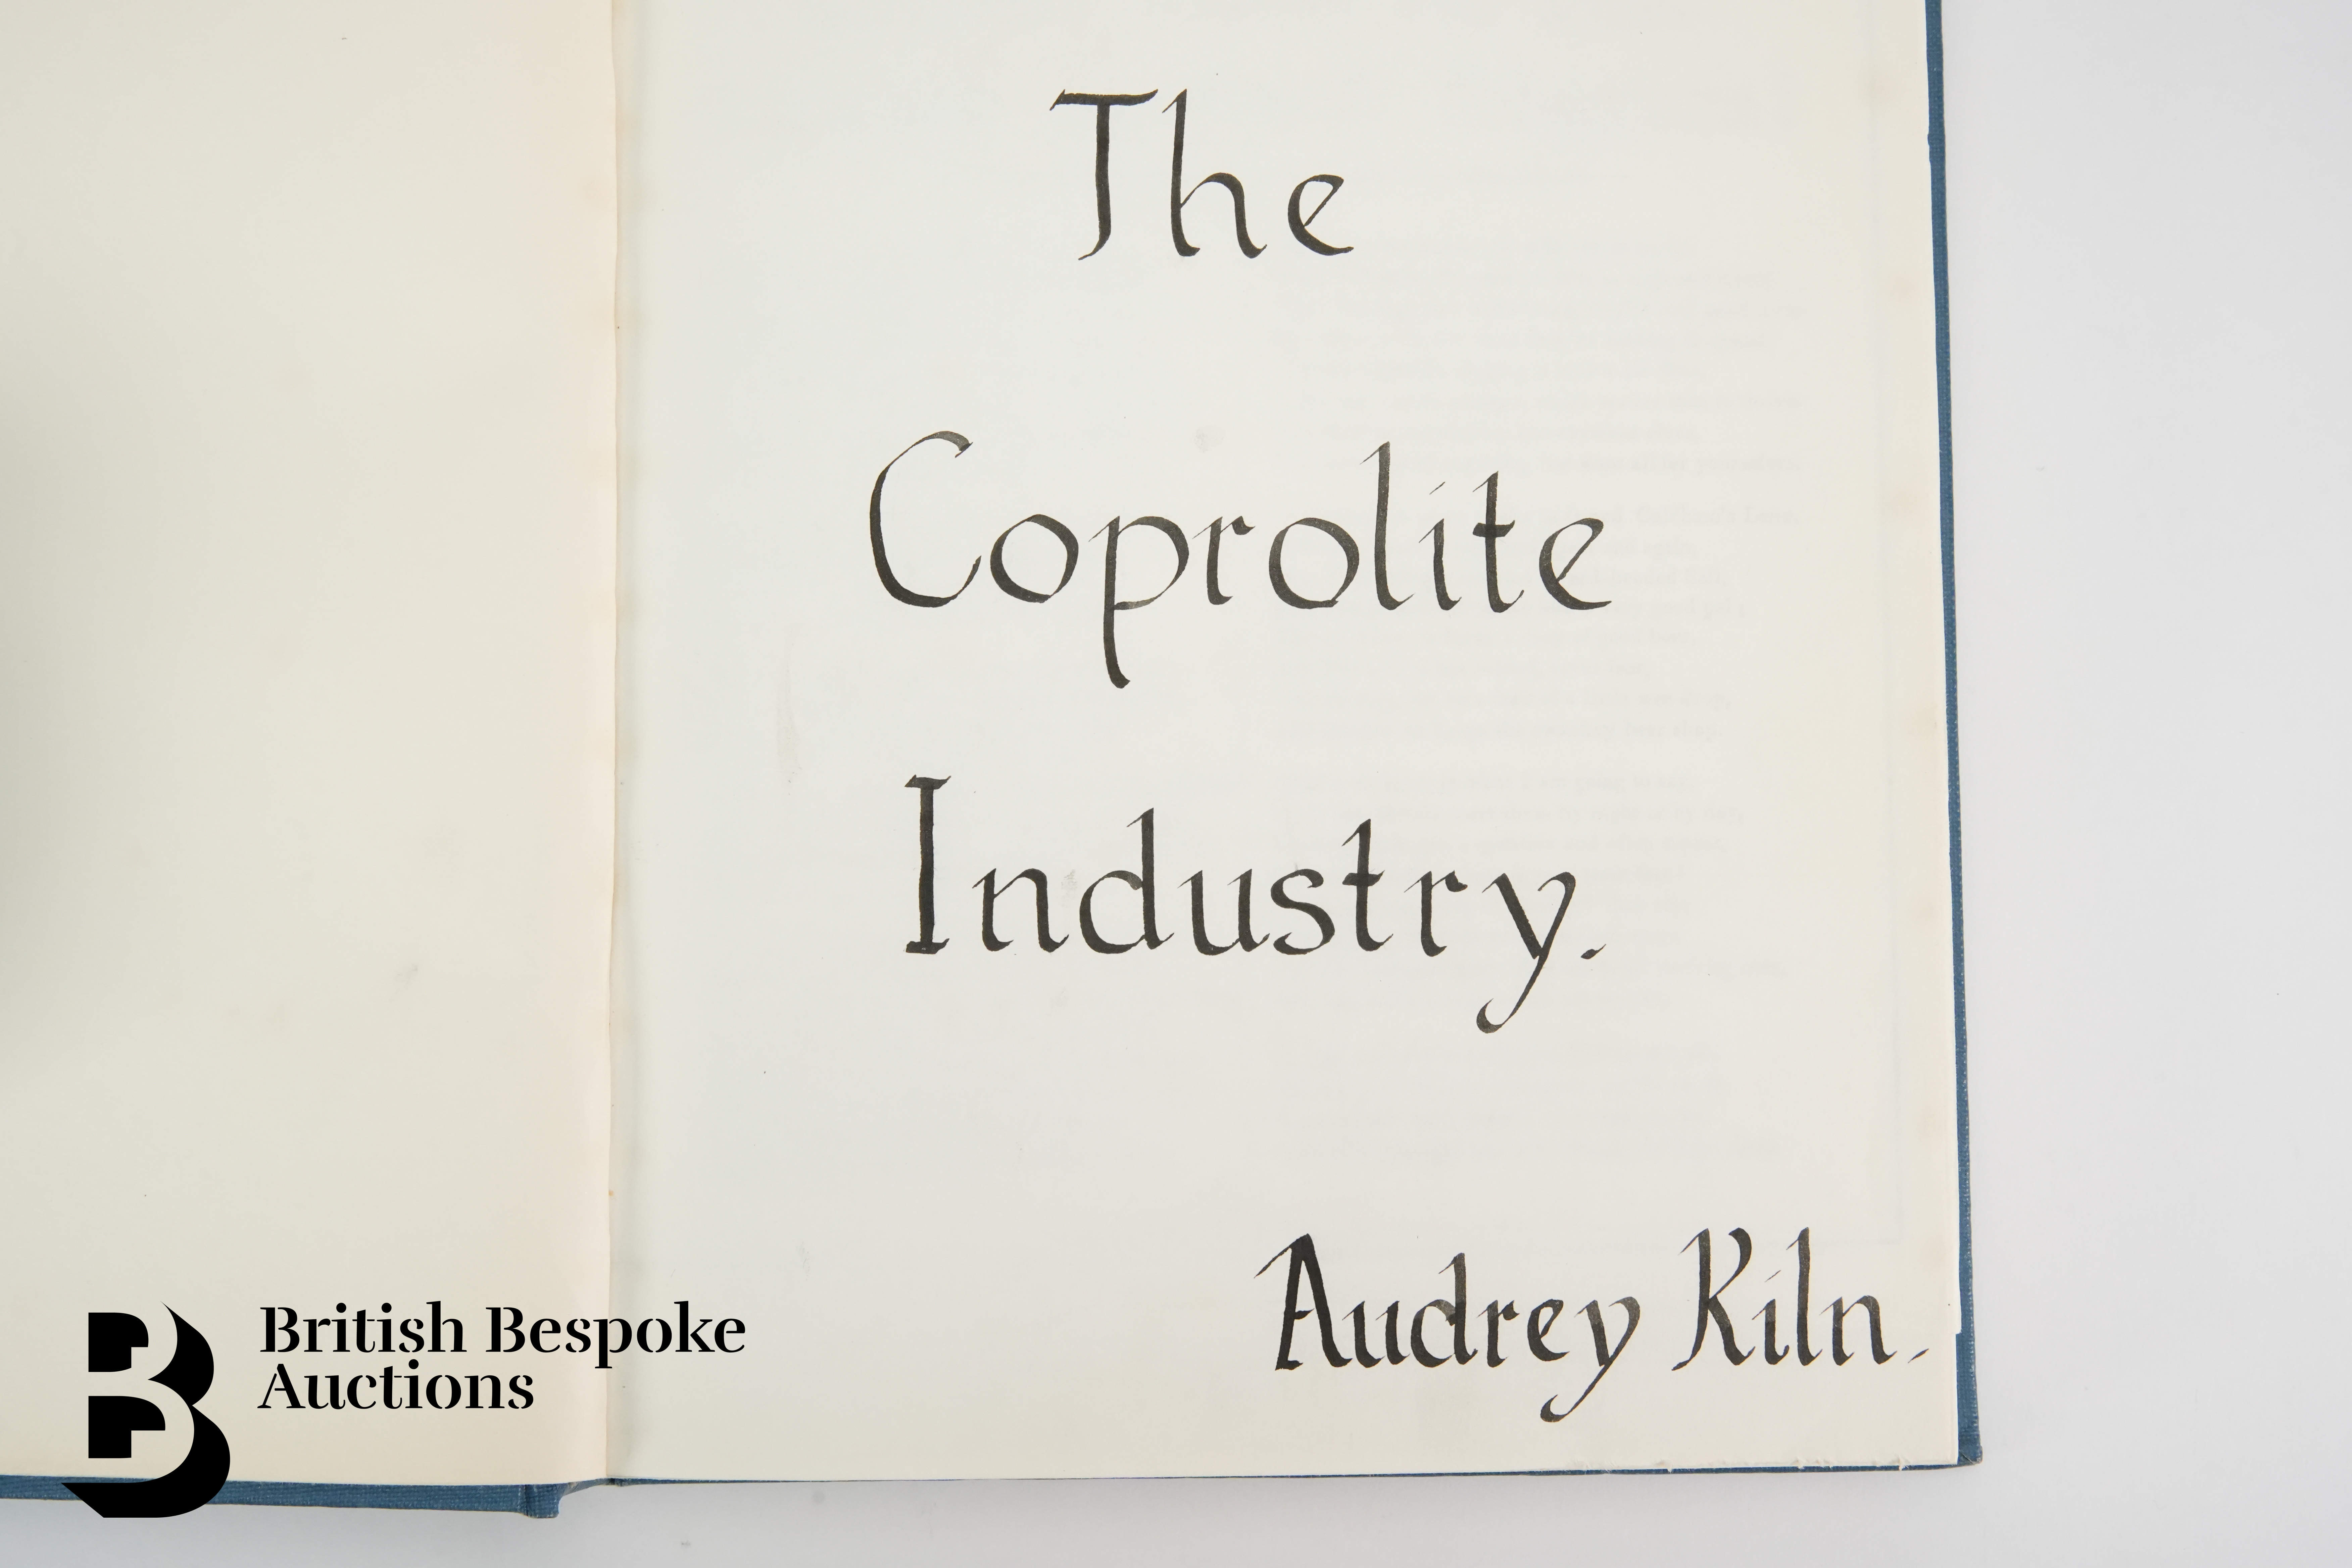 Interesting Project by Audrey Kiln of the Coprolite Industry - Image 2 of 11